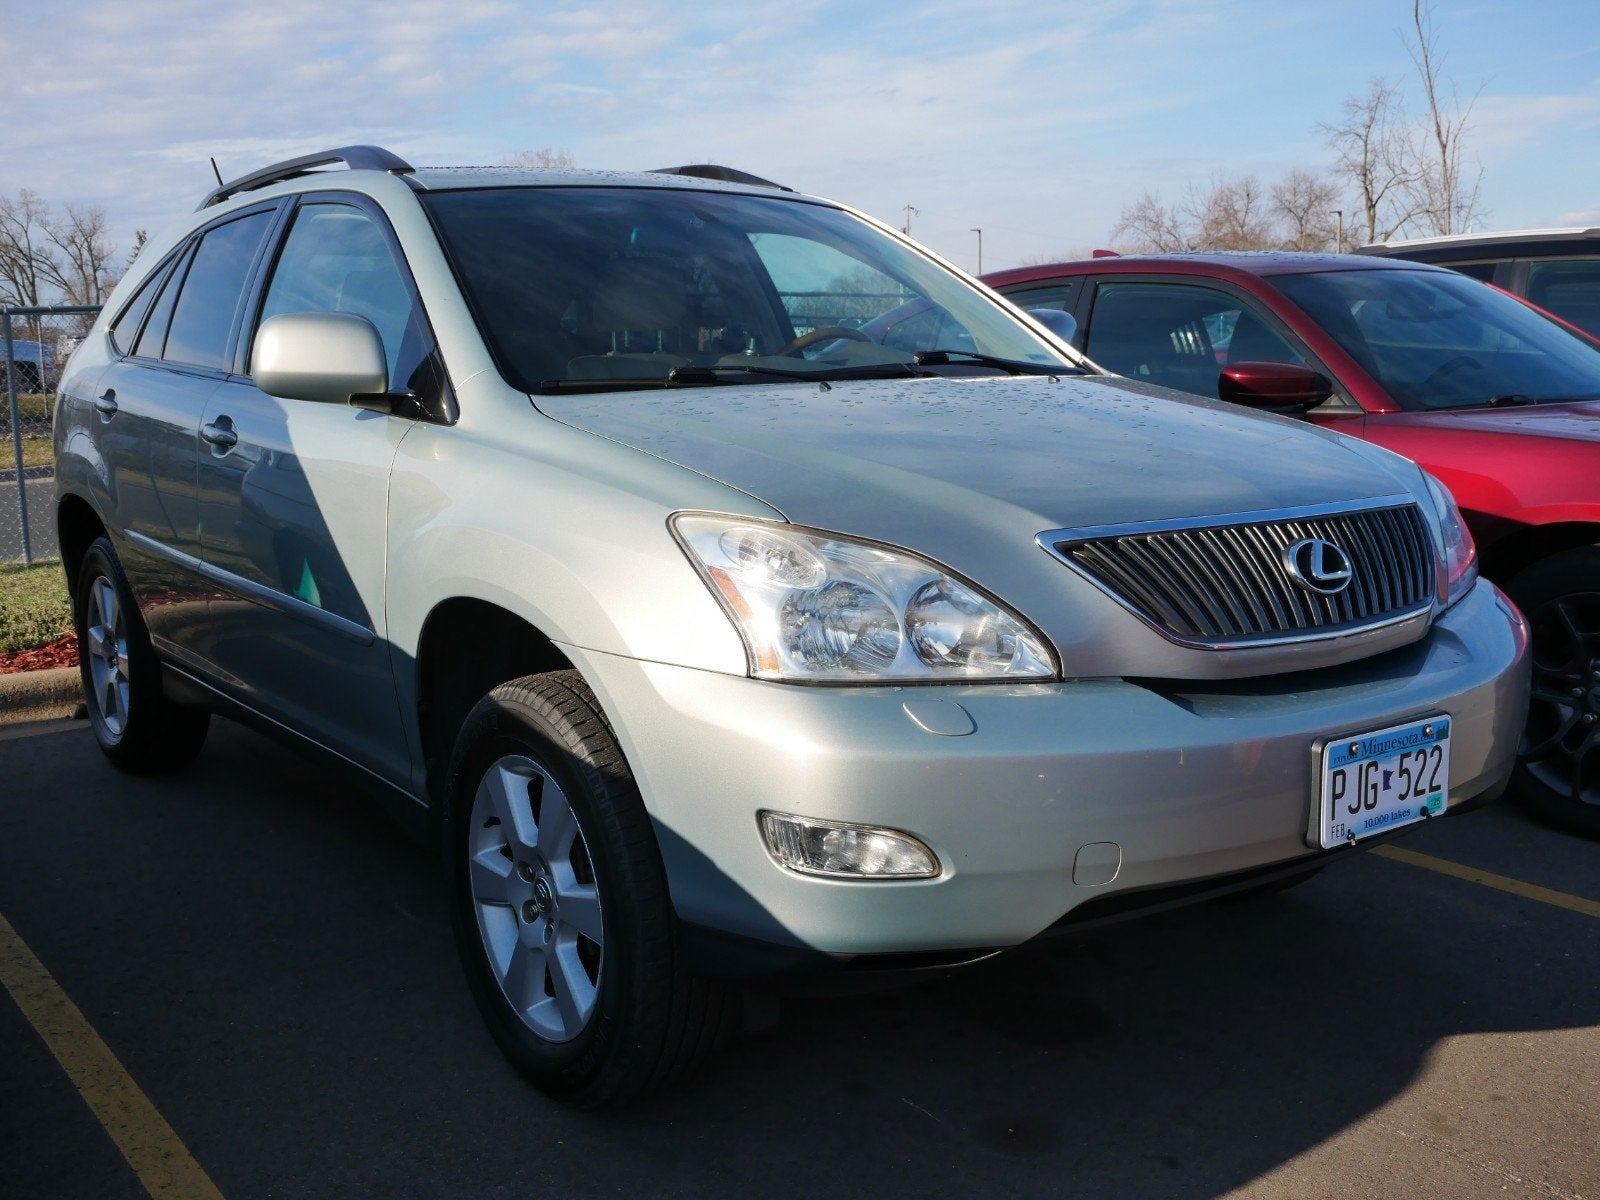 Used 2006 Lexus RX 330 with VIN 2T2HA31UX6C102130 for sale in Fridley, Minnesota